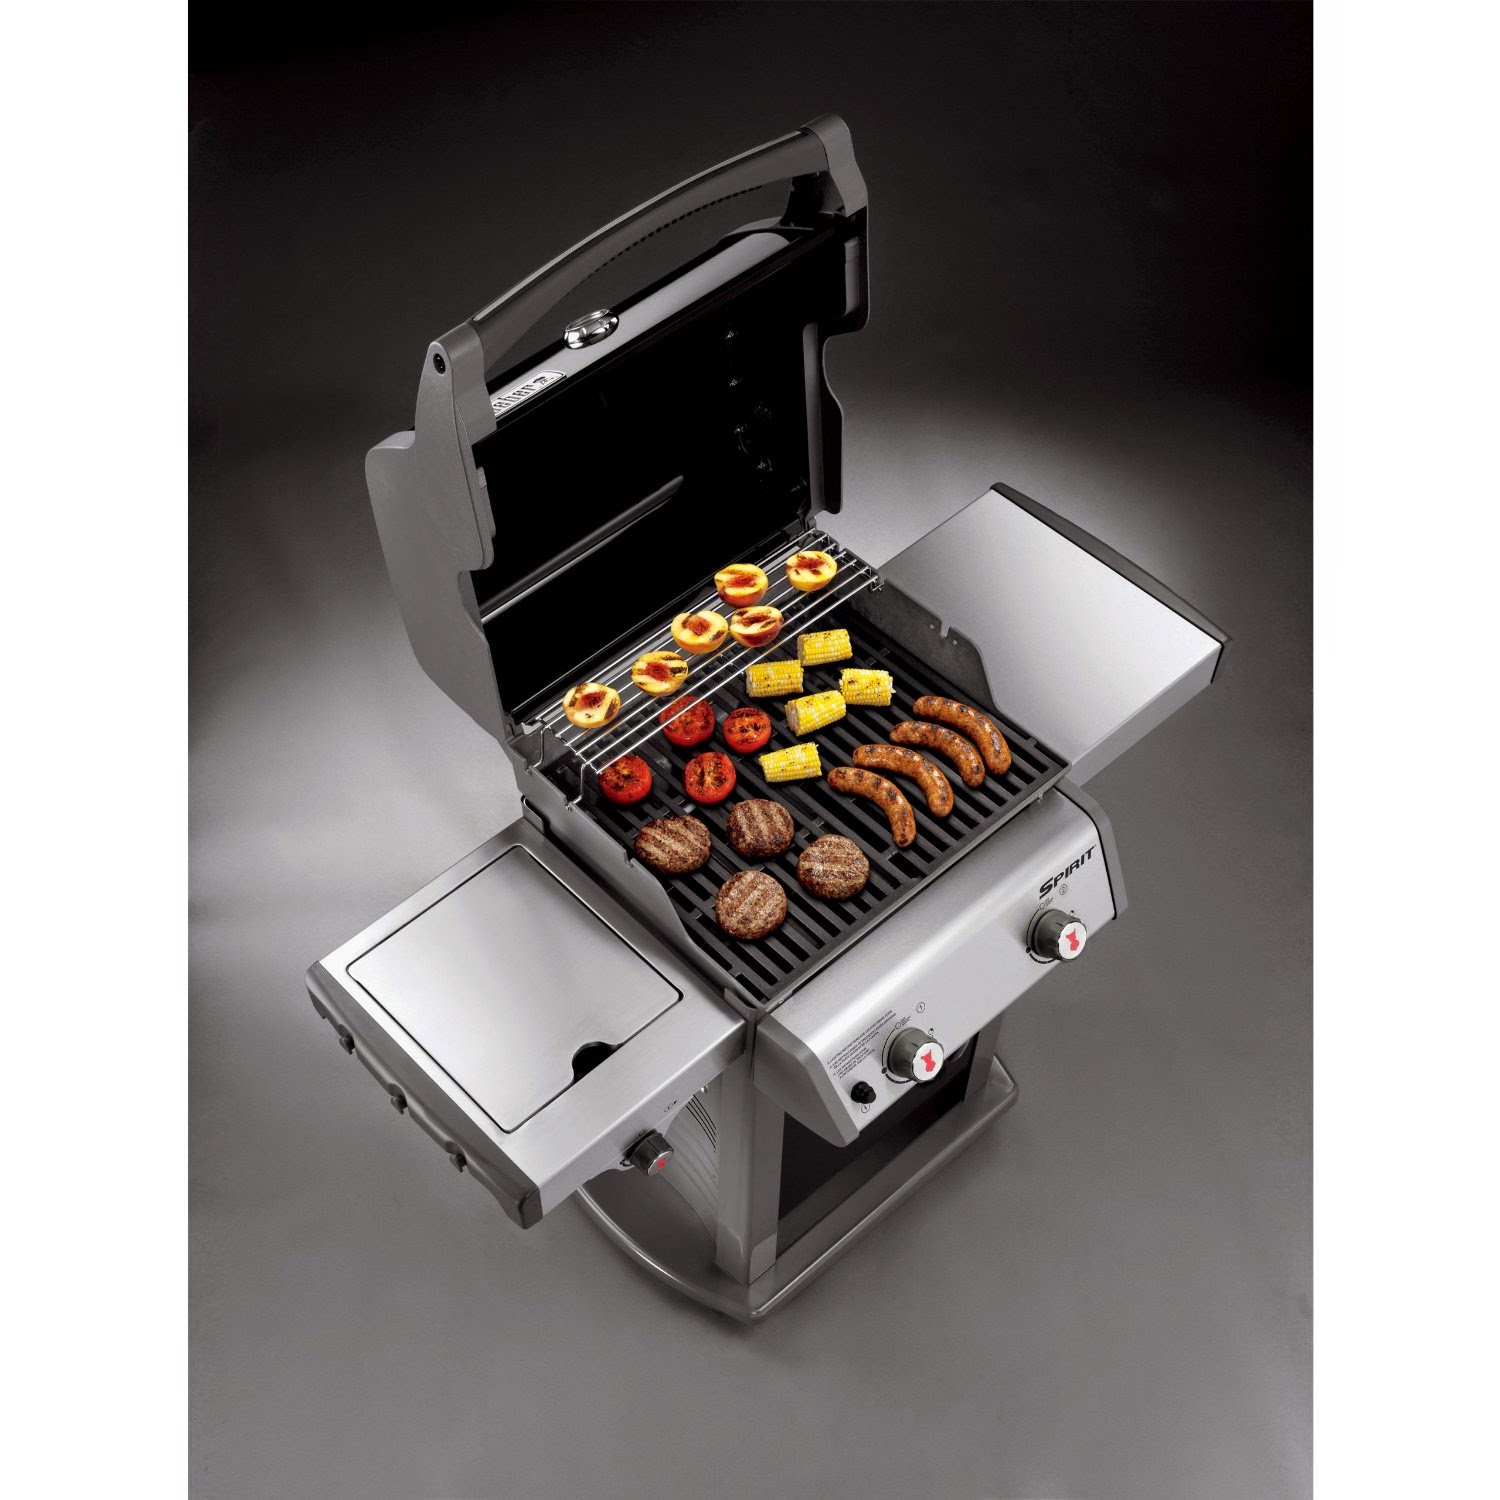 Weber 46310001 Spirit E220 Liquid Propane Gas Grill, picture, image, review features and specifications, compare with E210